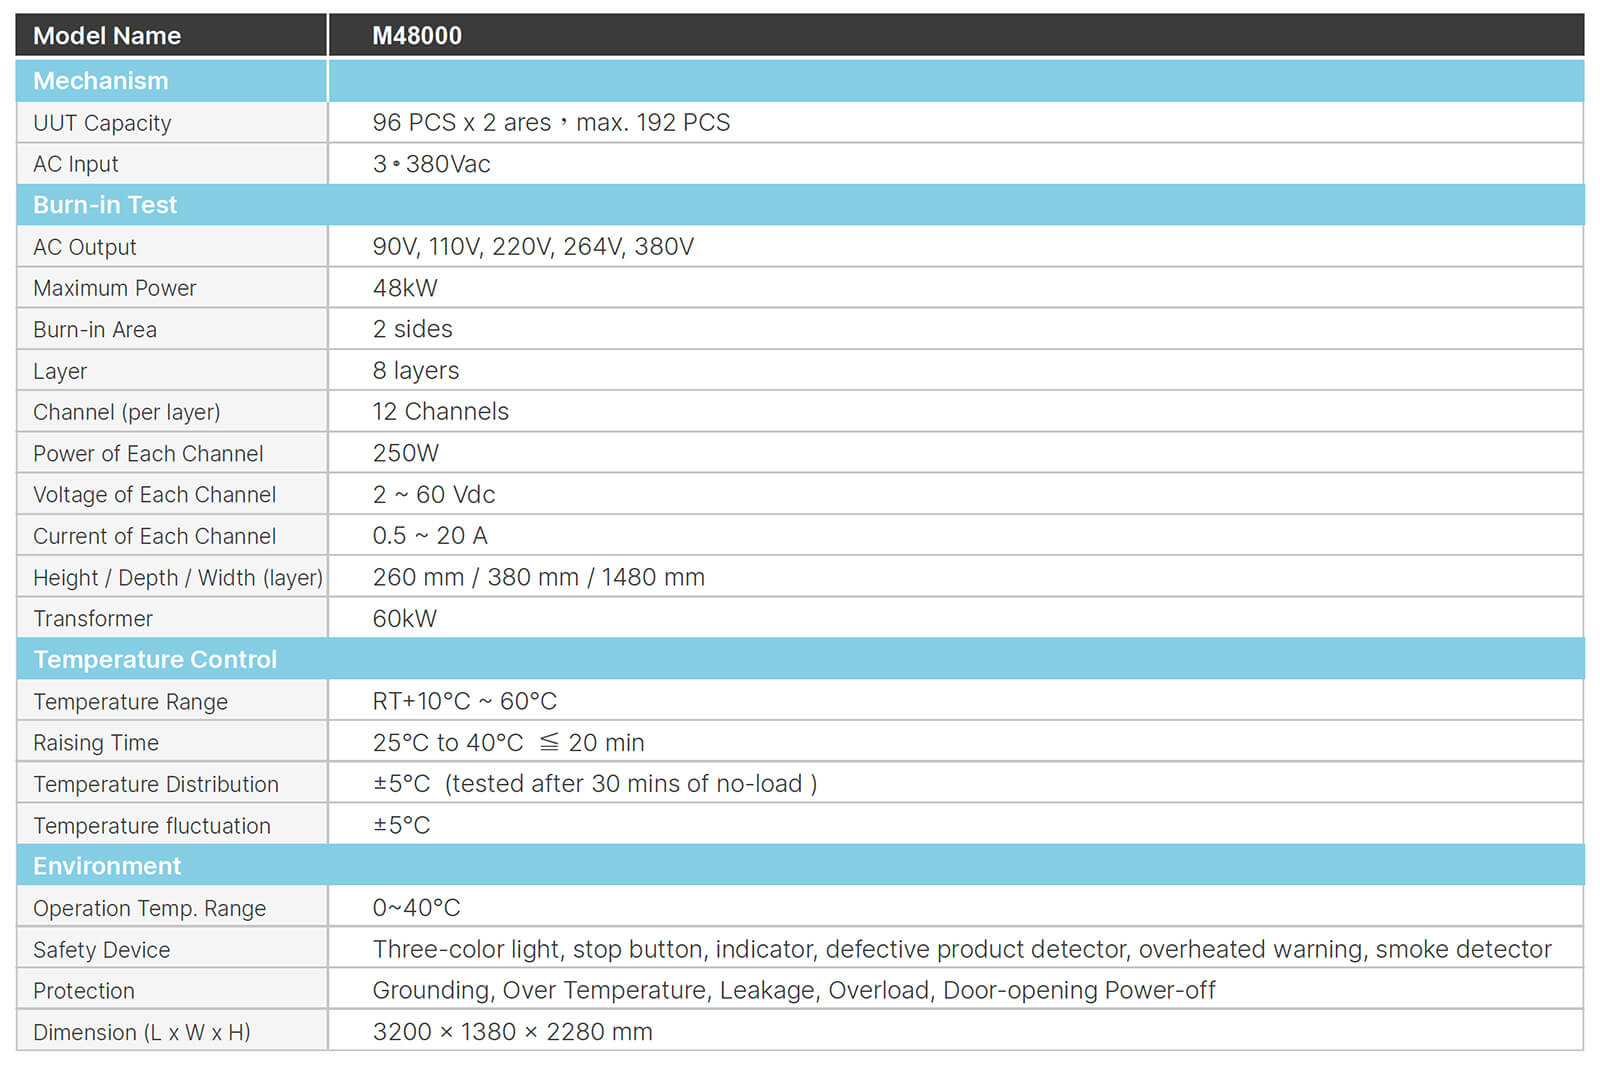 M480000 Specification